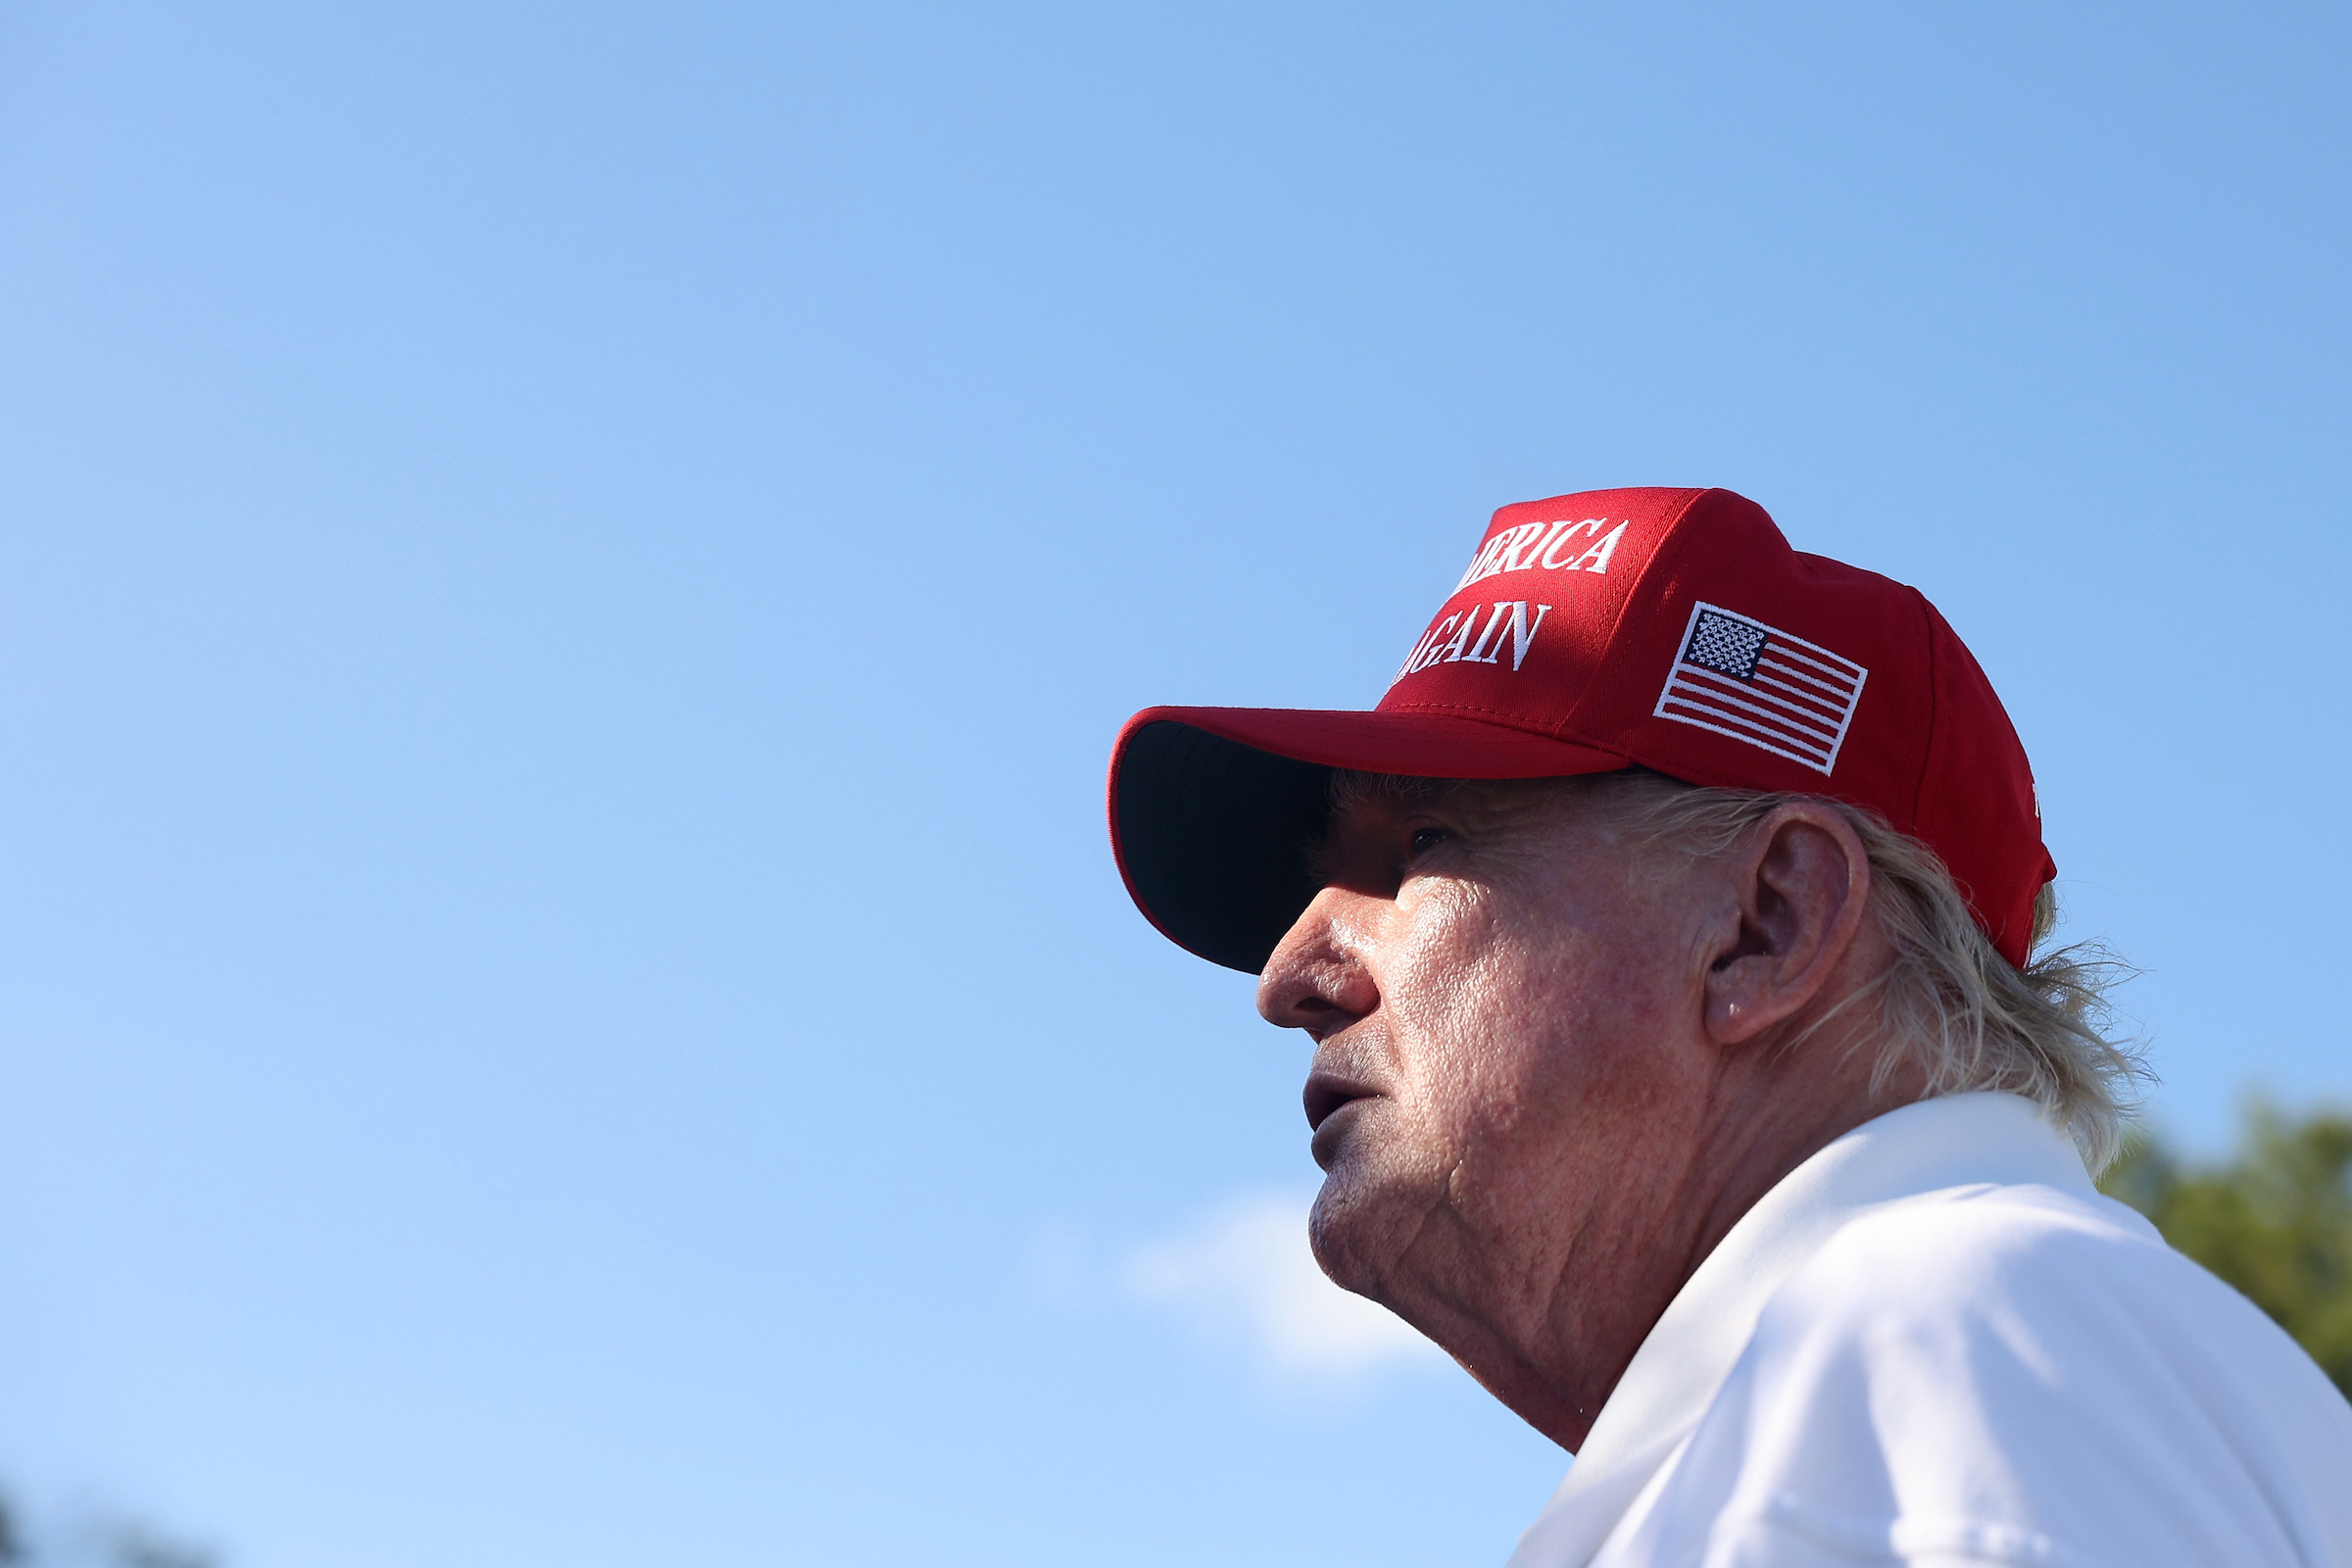 Former President Donald Trump signs autographs hits his shot from the 16th tee during day three of the LIV Golf Invitational Bedminster at Trump National Golf Club on August 13, 2023 in Bedminster, New Jersey.